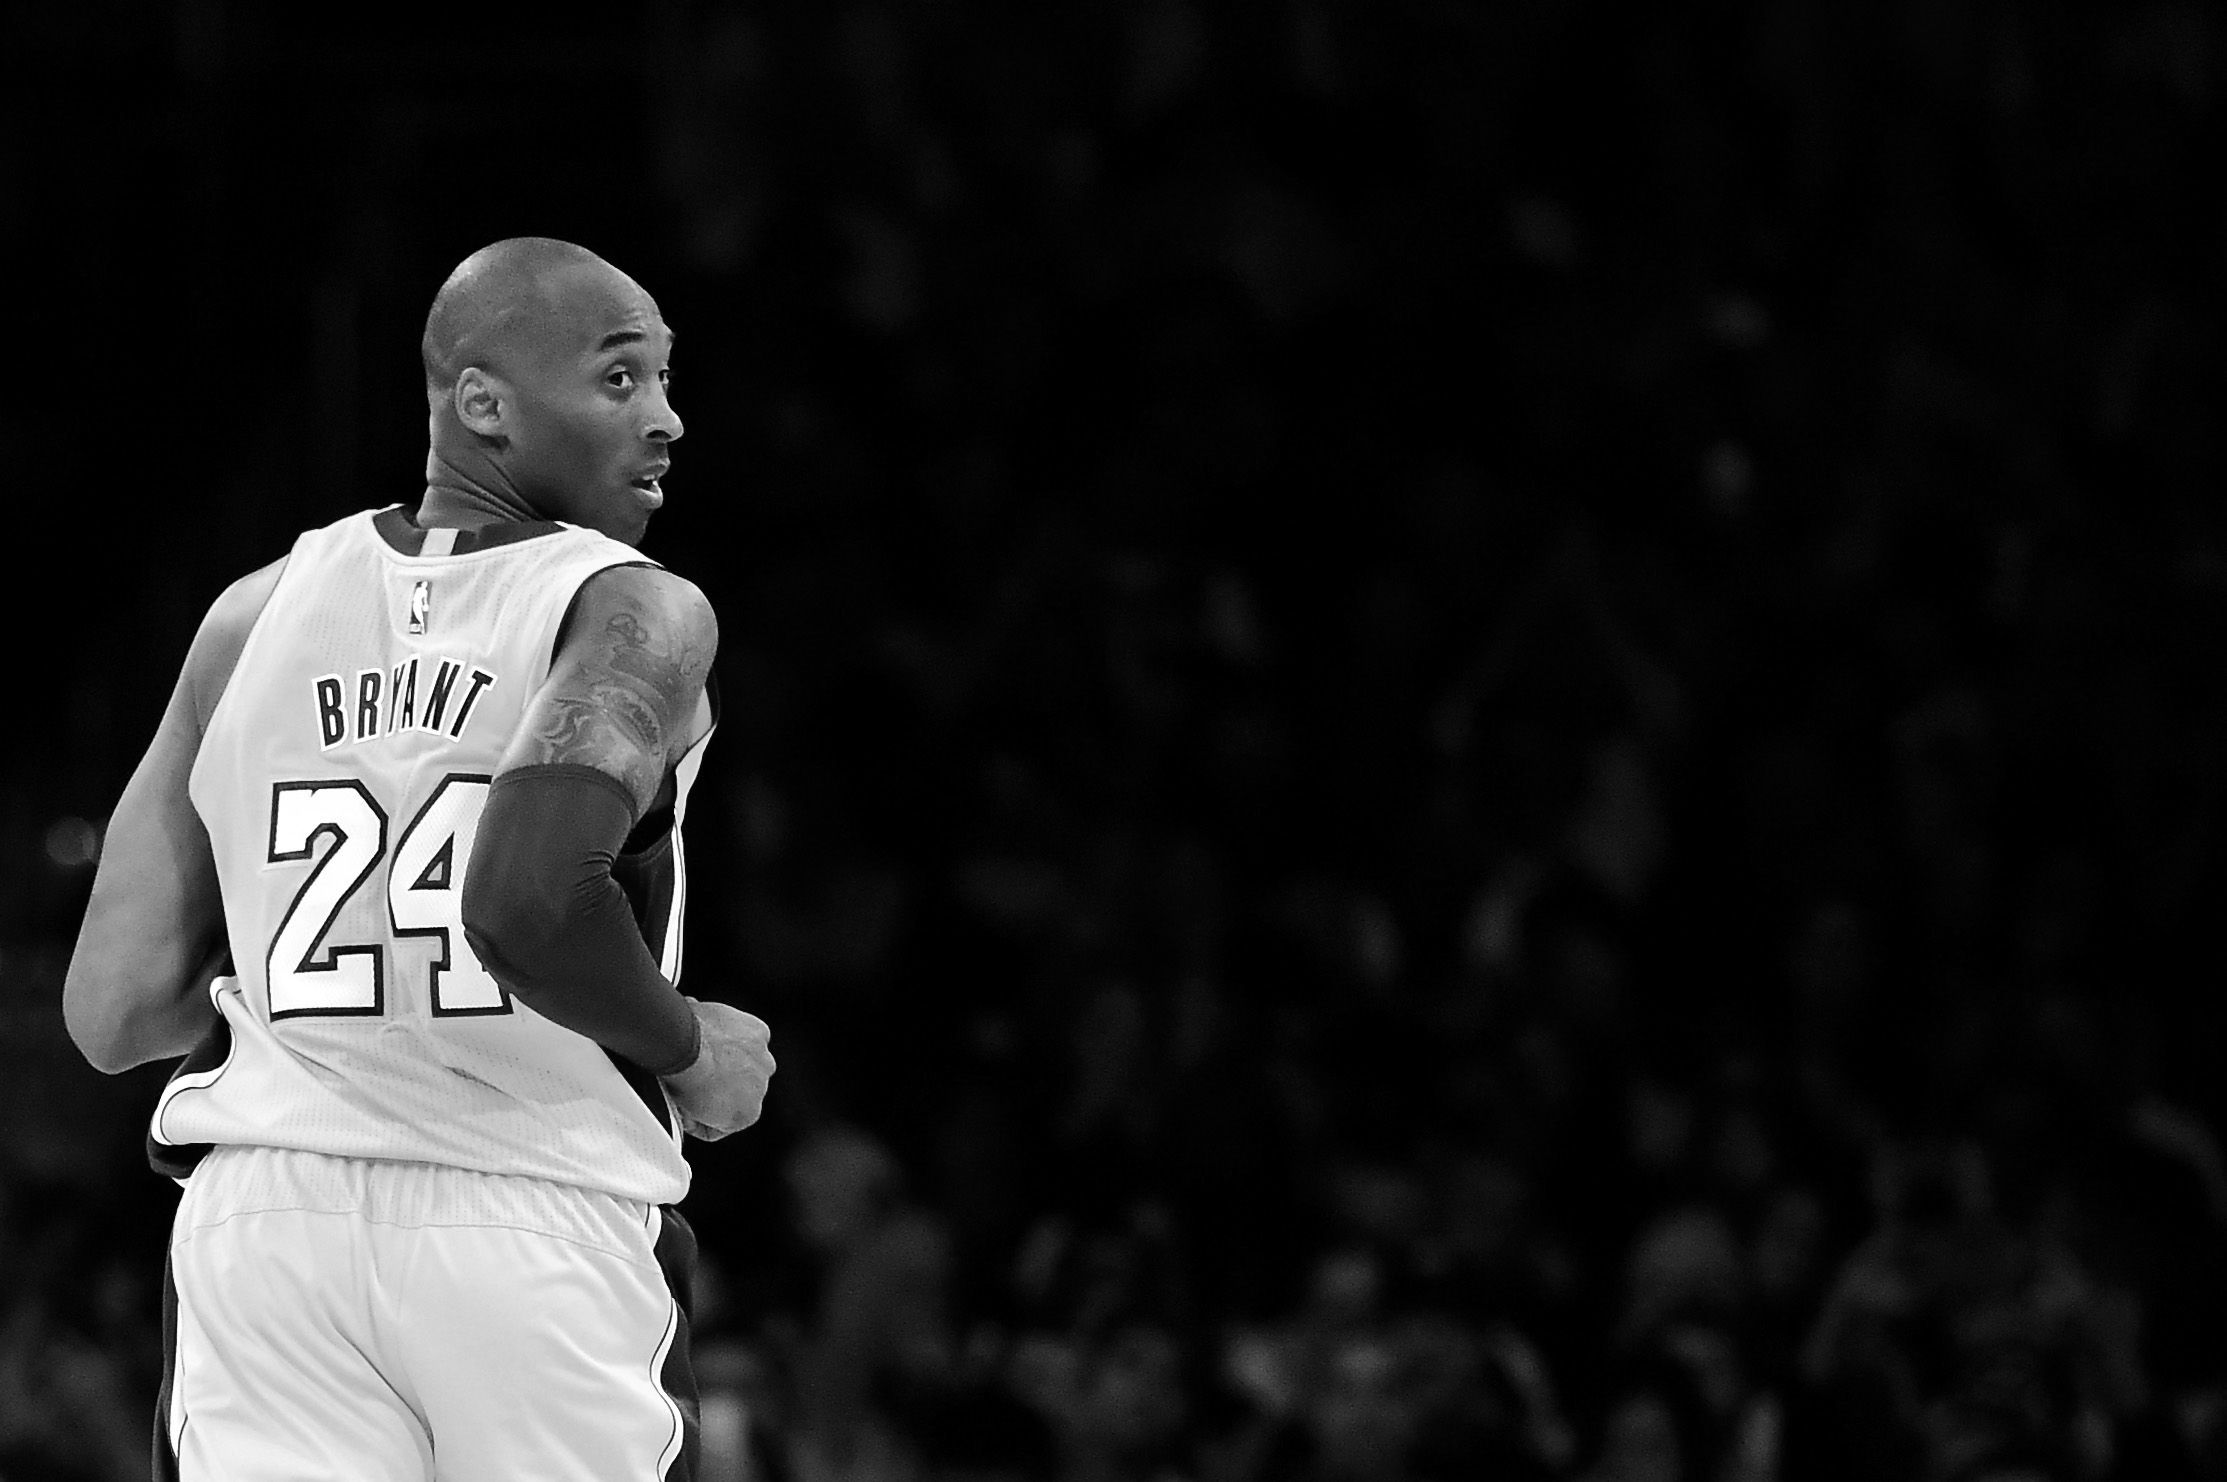 Kobe Bryant's storied career year-by-year